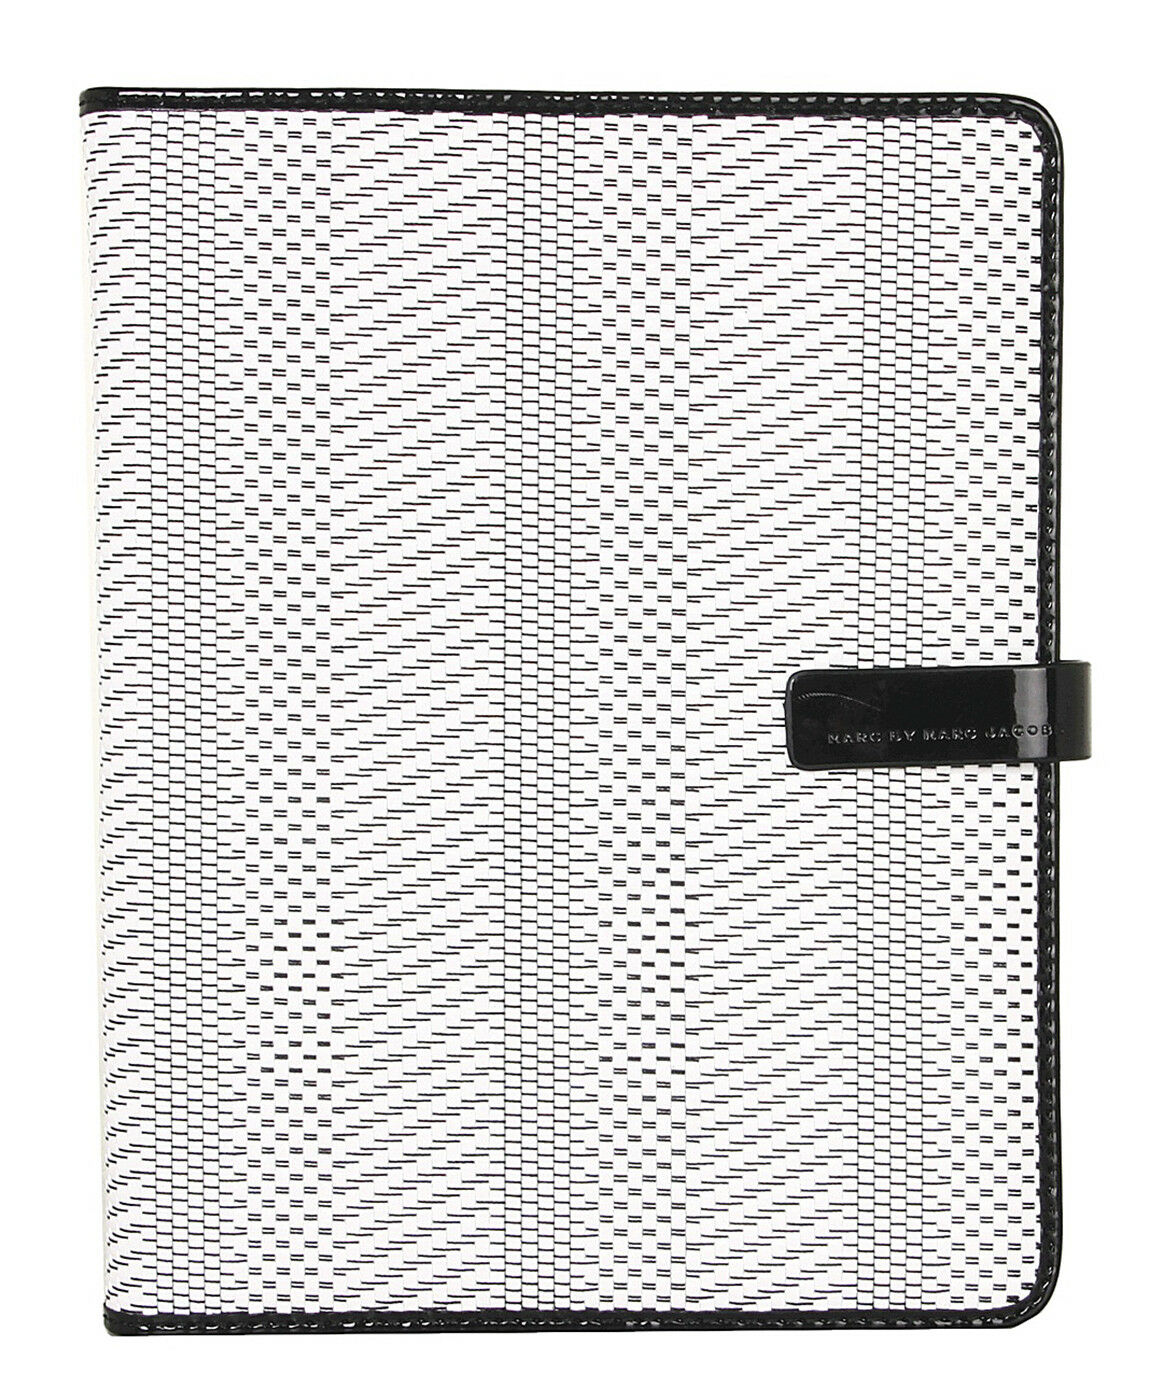 Marc Jacobs Wildcard Woven Straw Tablet iPad Folio Book Case NWT